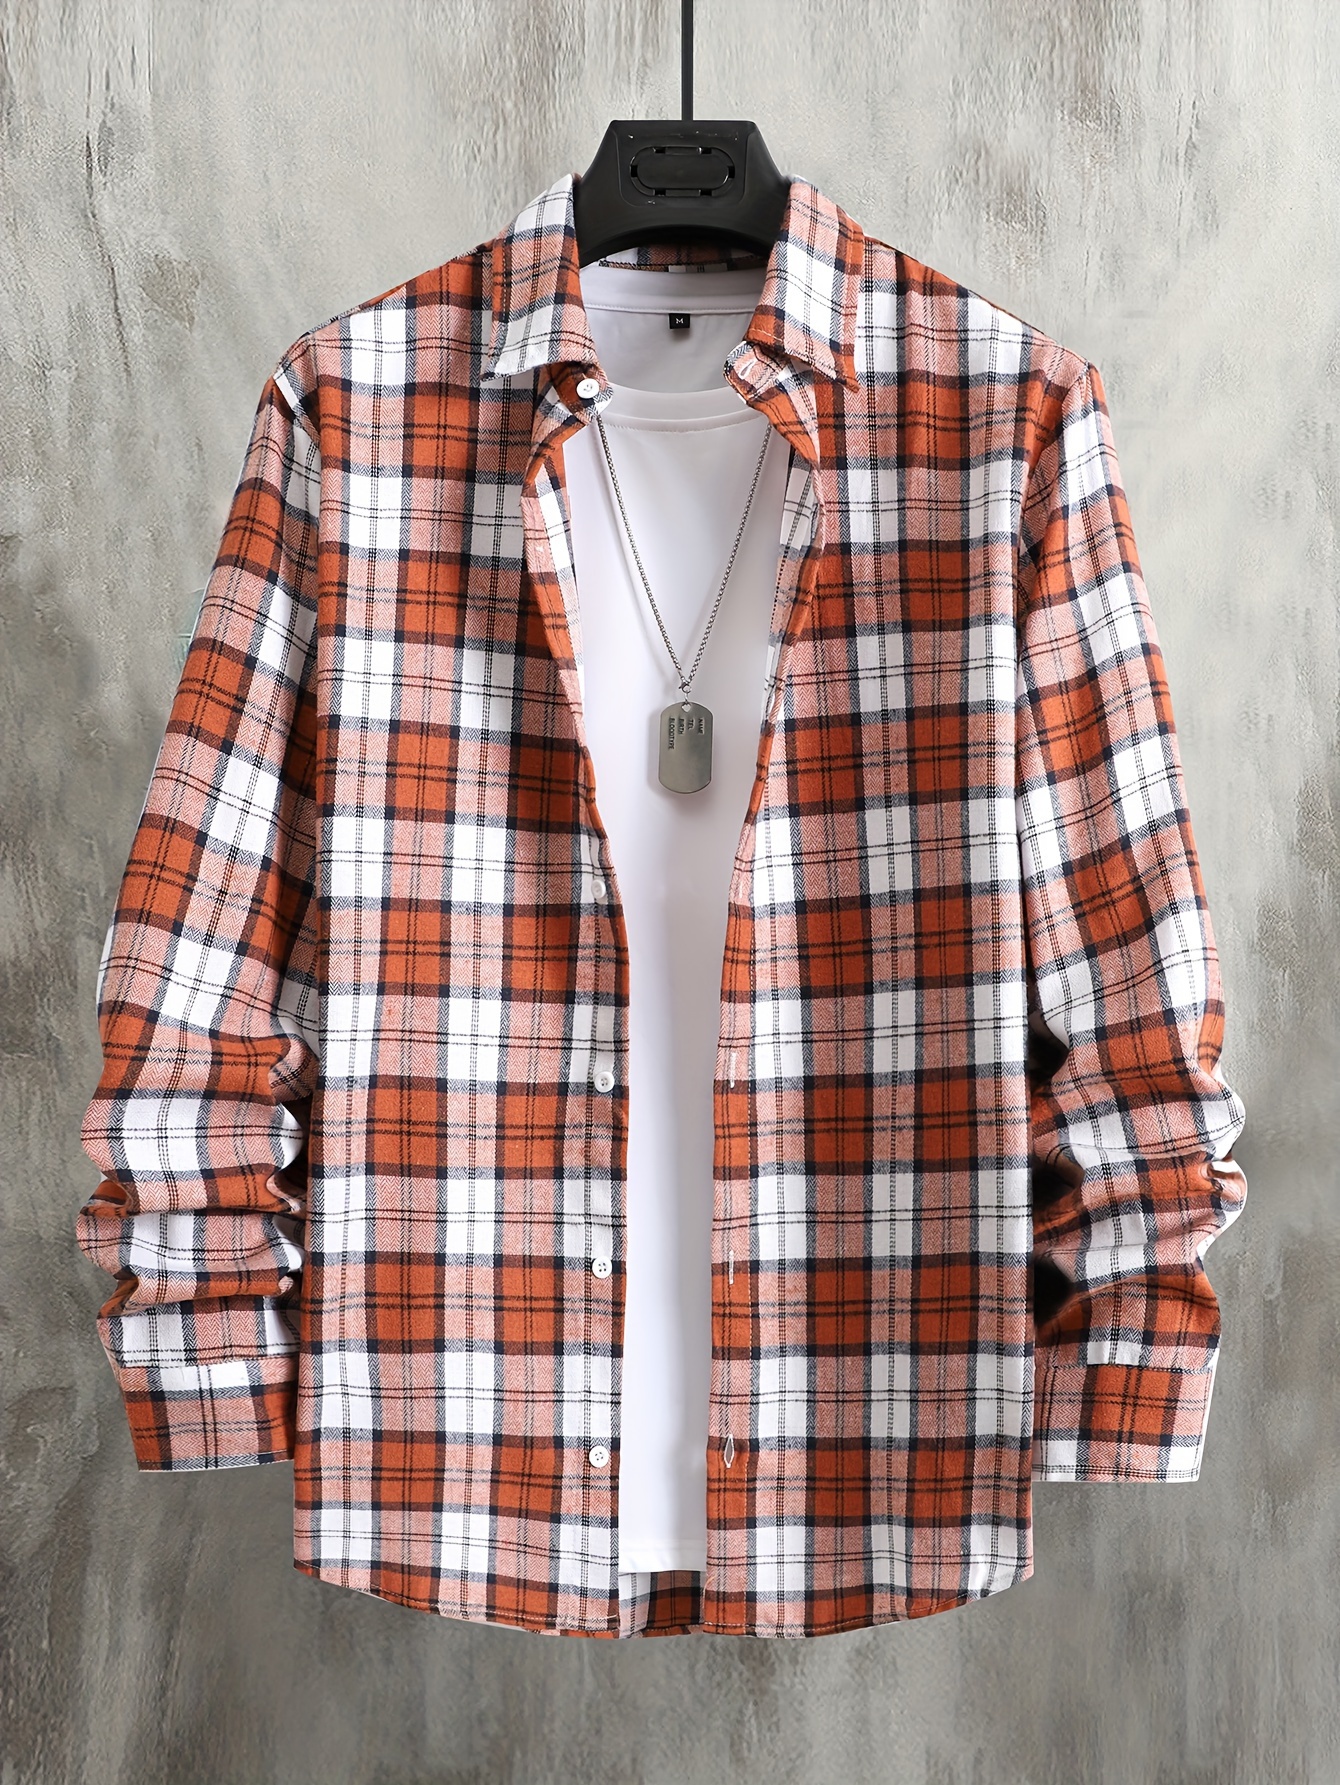 Color Block Plaid Pattern Men's Long Sleeve Button Down Shirt For Spring  Fall Outdoor